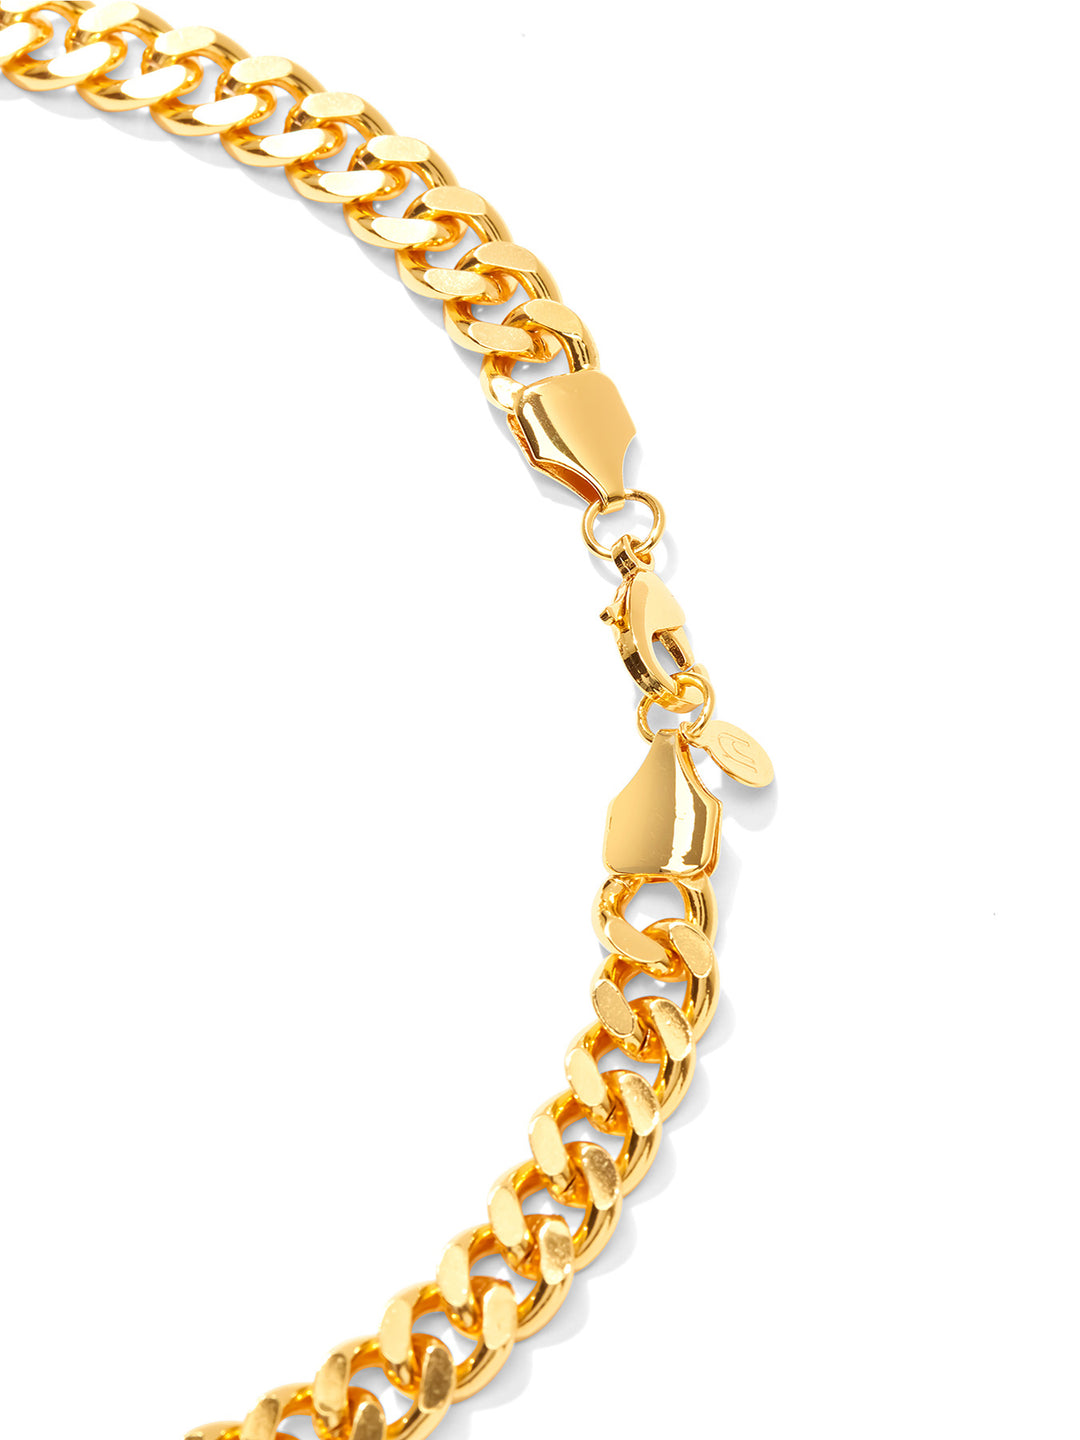 CUBAN LINK CHAIN • Color: 18K Yellow Gold